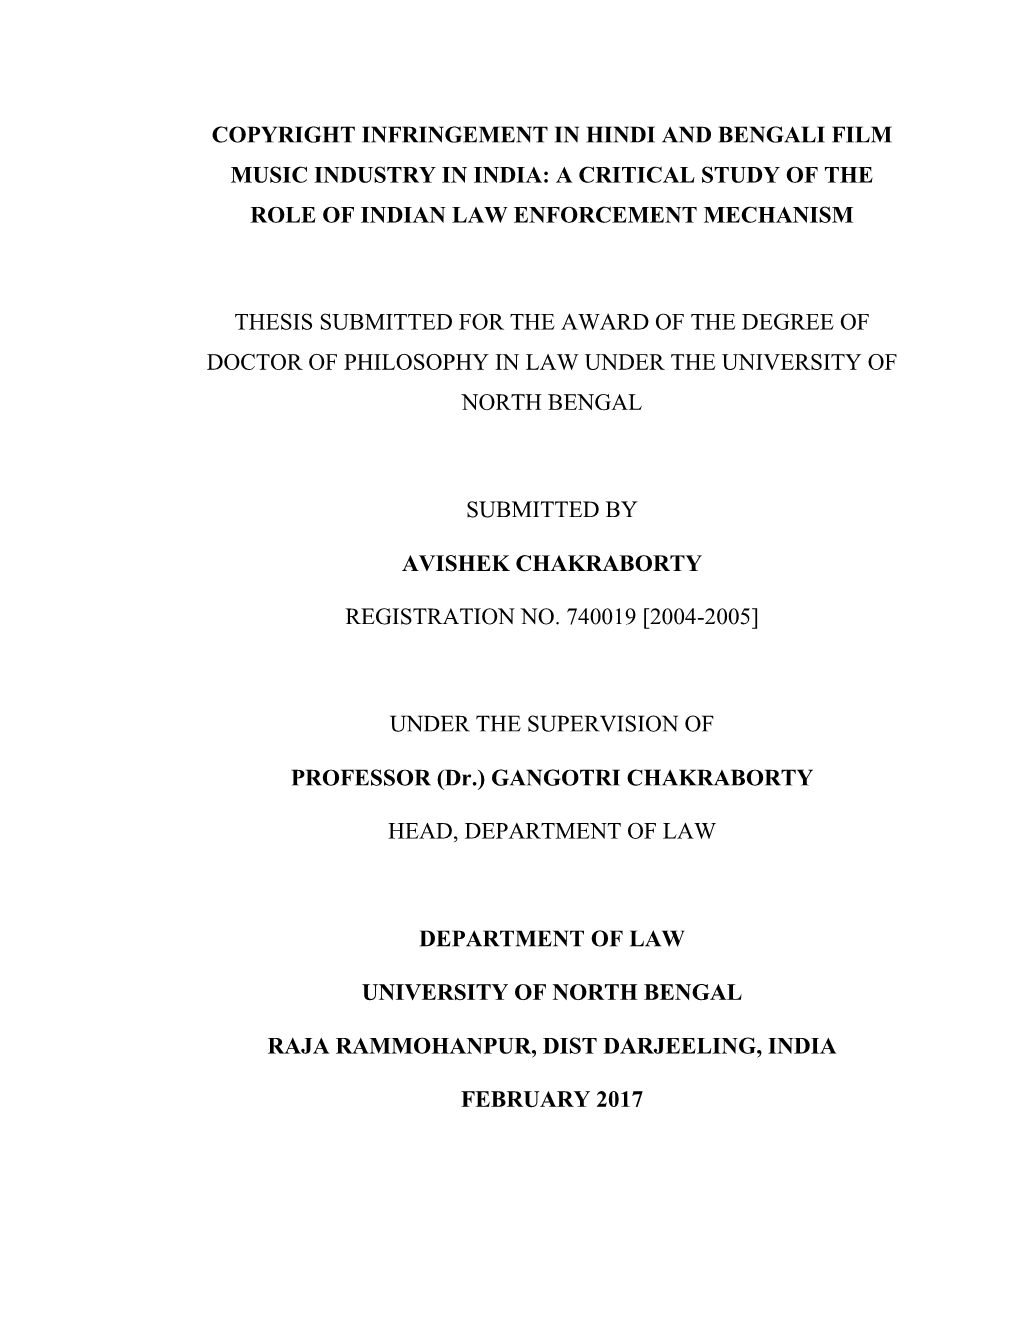 Copyright Infringement in Hindi and Bengali Film Music Industry in India: a Critical Study of the Role of Indian Law Enforcement Mechanism